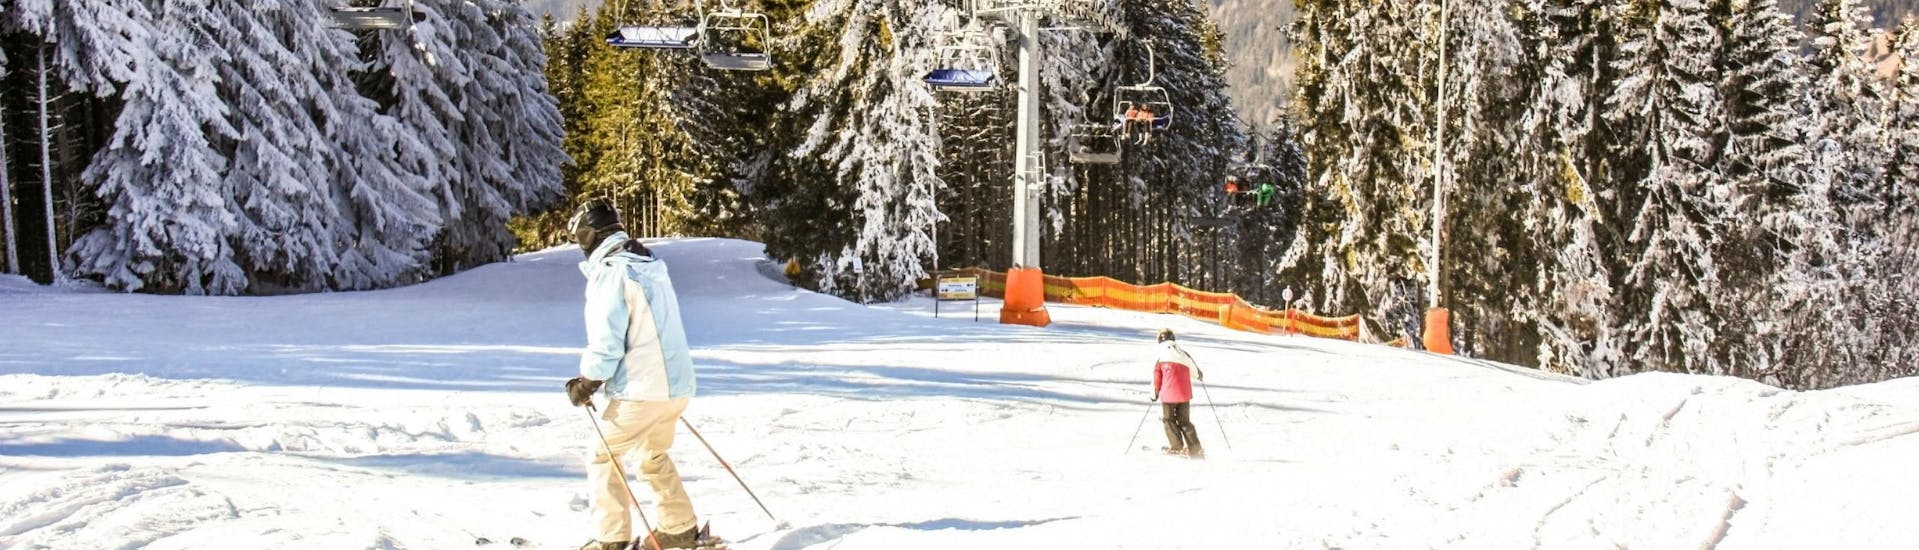 Two skiers are skiing down one of the ski slopes in the ski resort of Zauberberg-Hirschenkogel, where visitors can book ski lessons with the local ski schools.